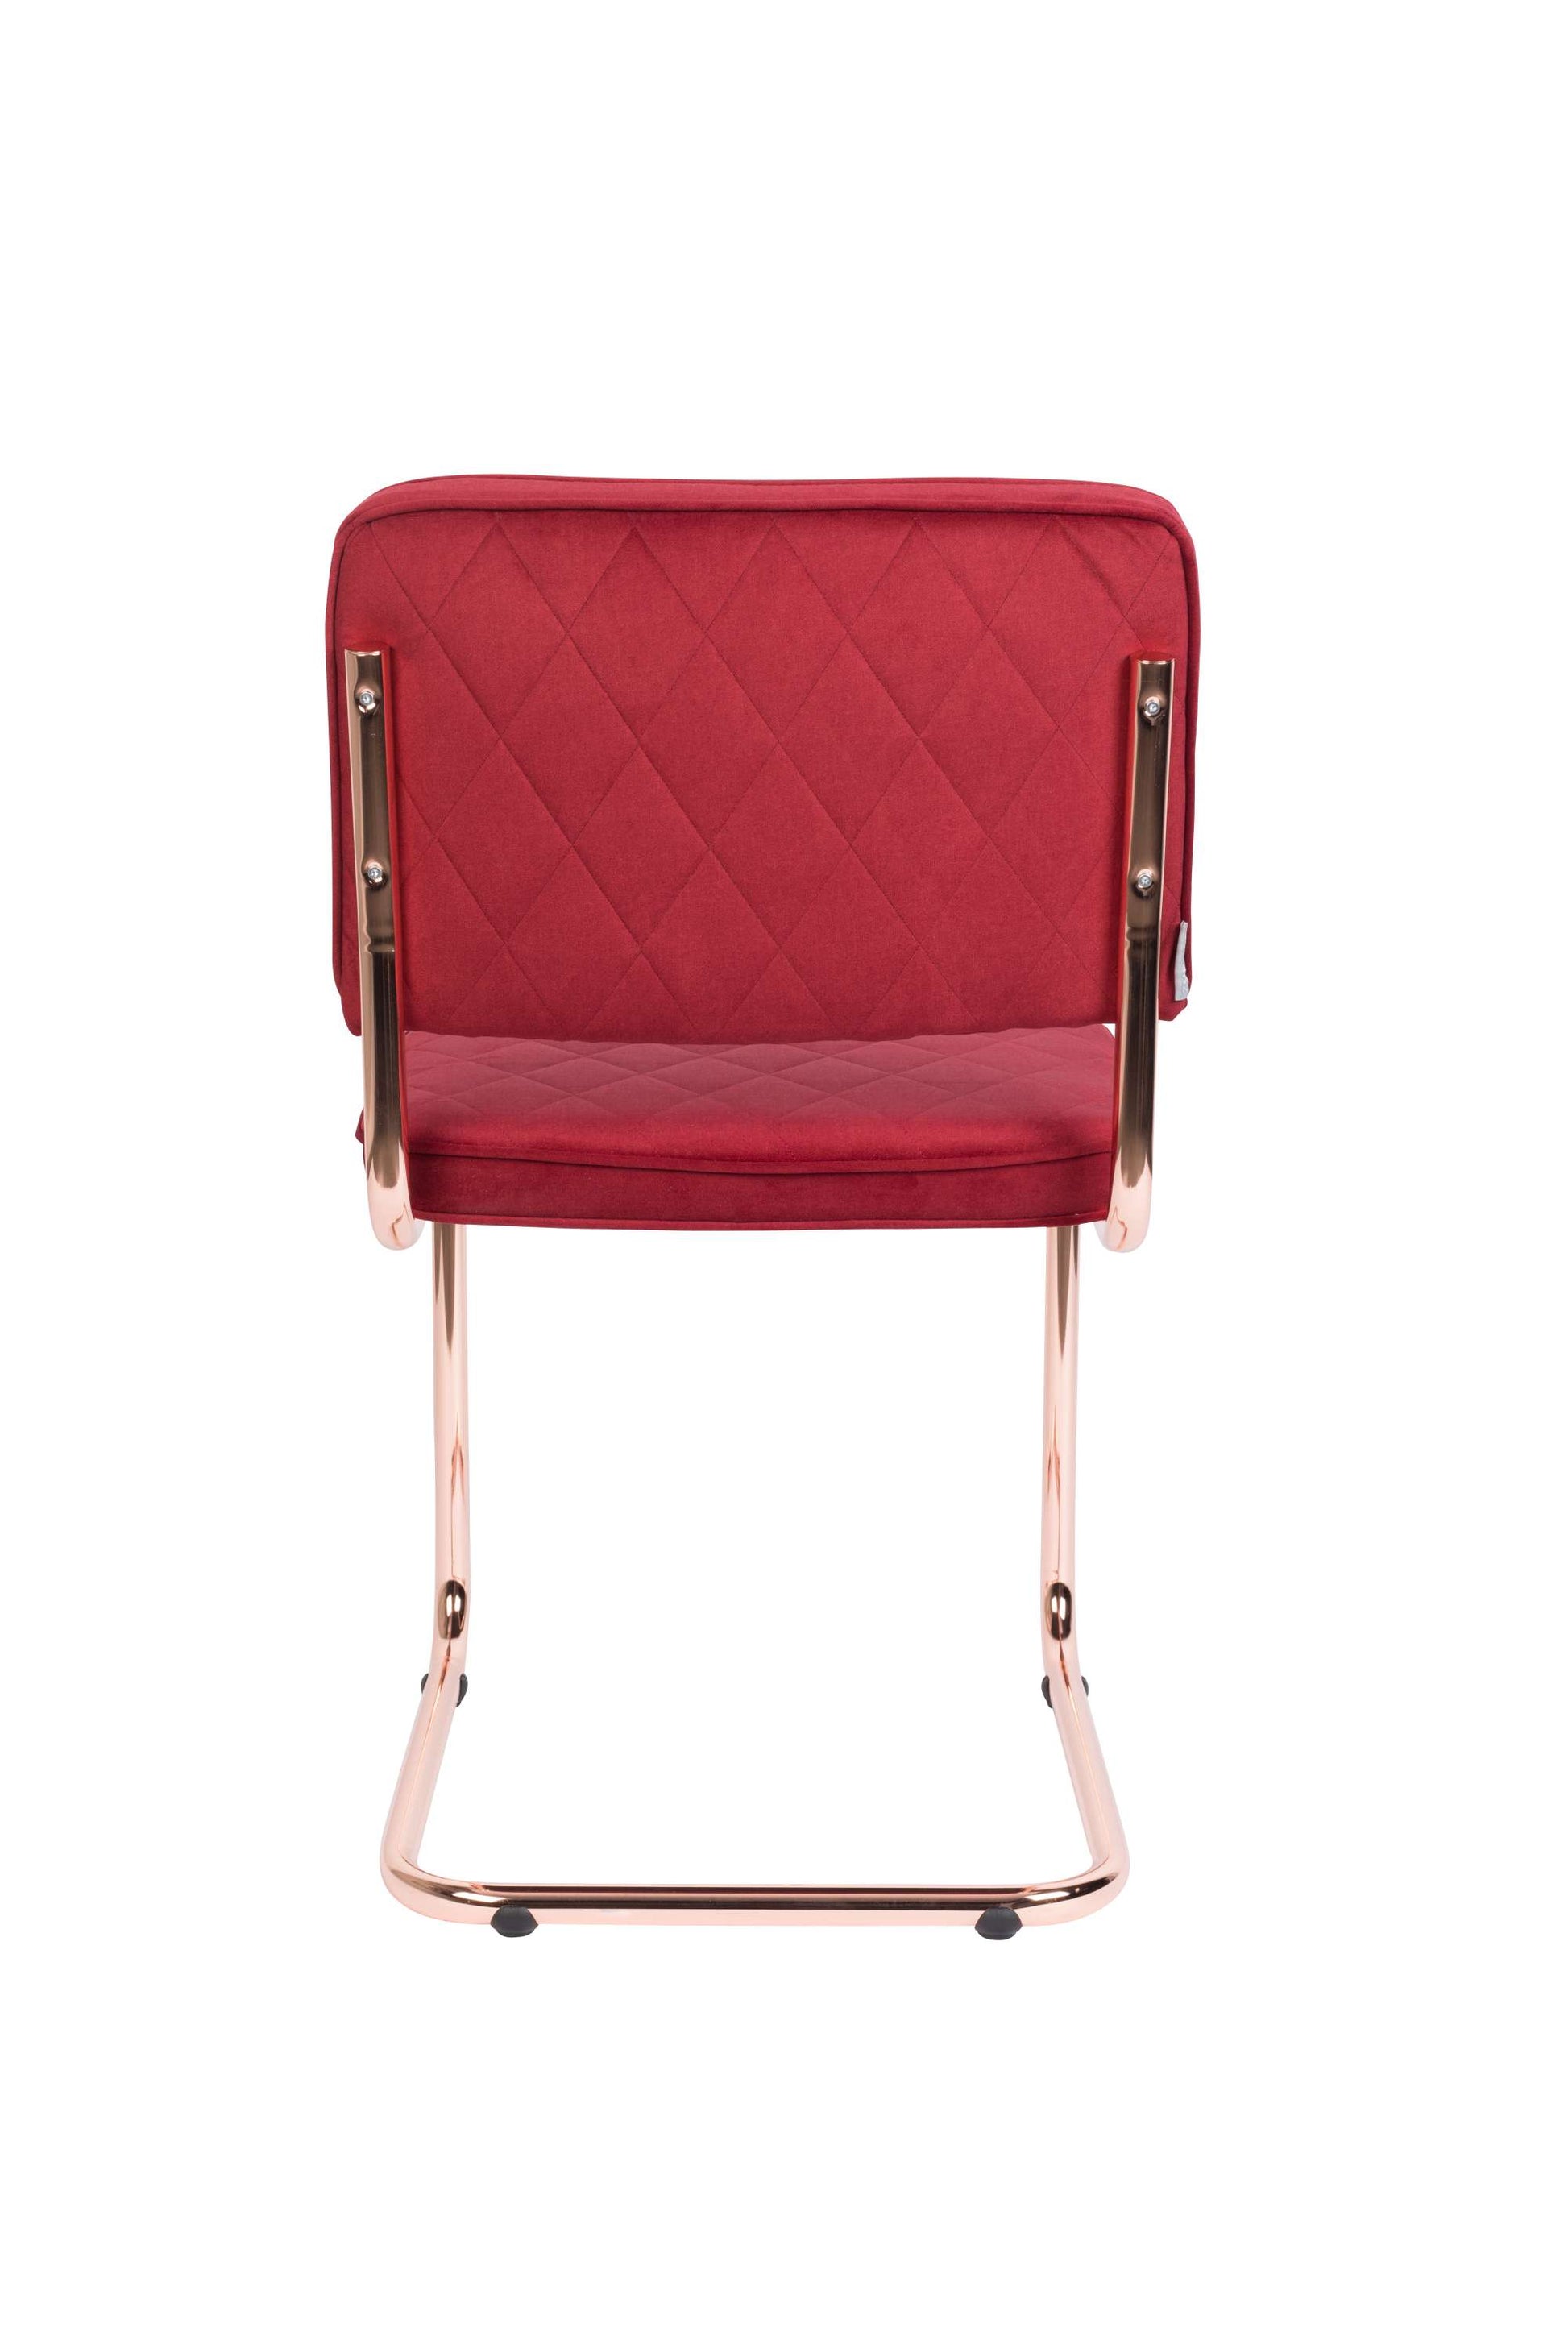 Zuiver | CHAIR DIAMOND ROYAL RED Default Title